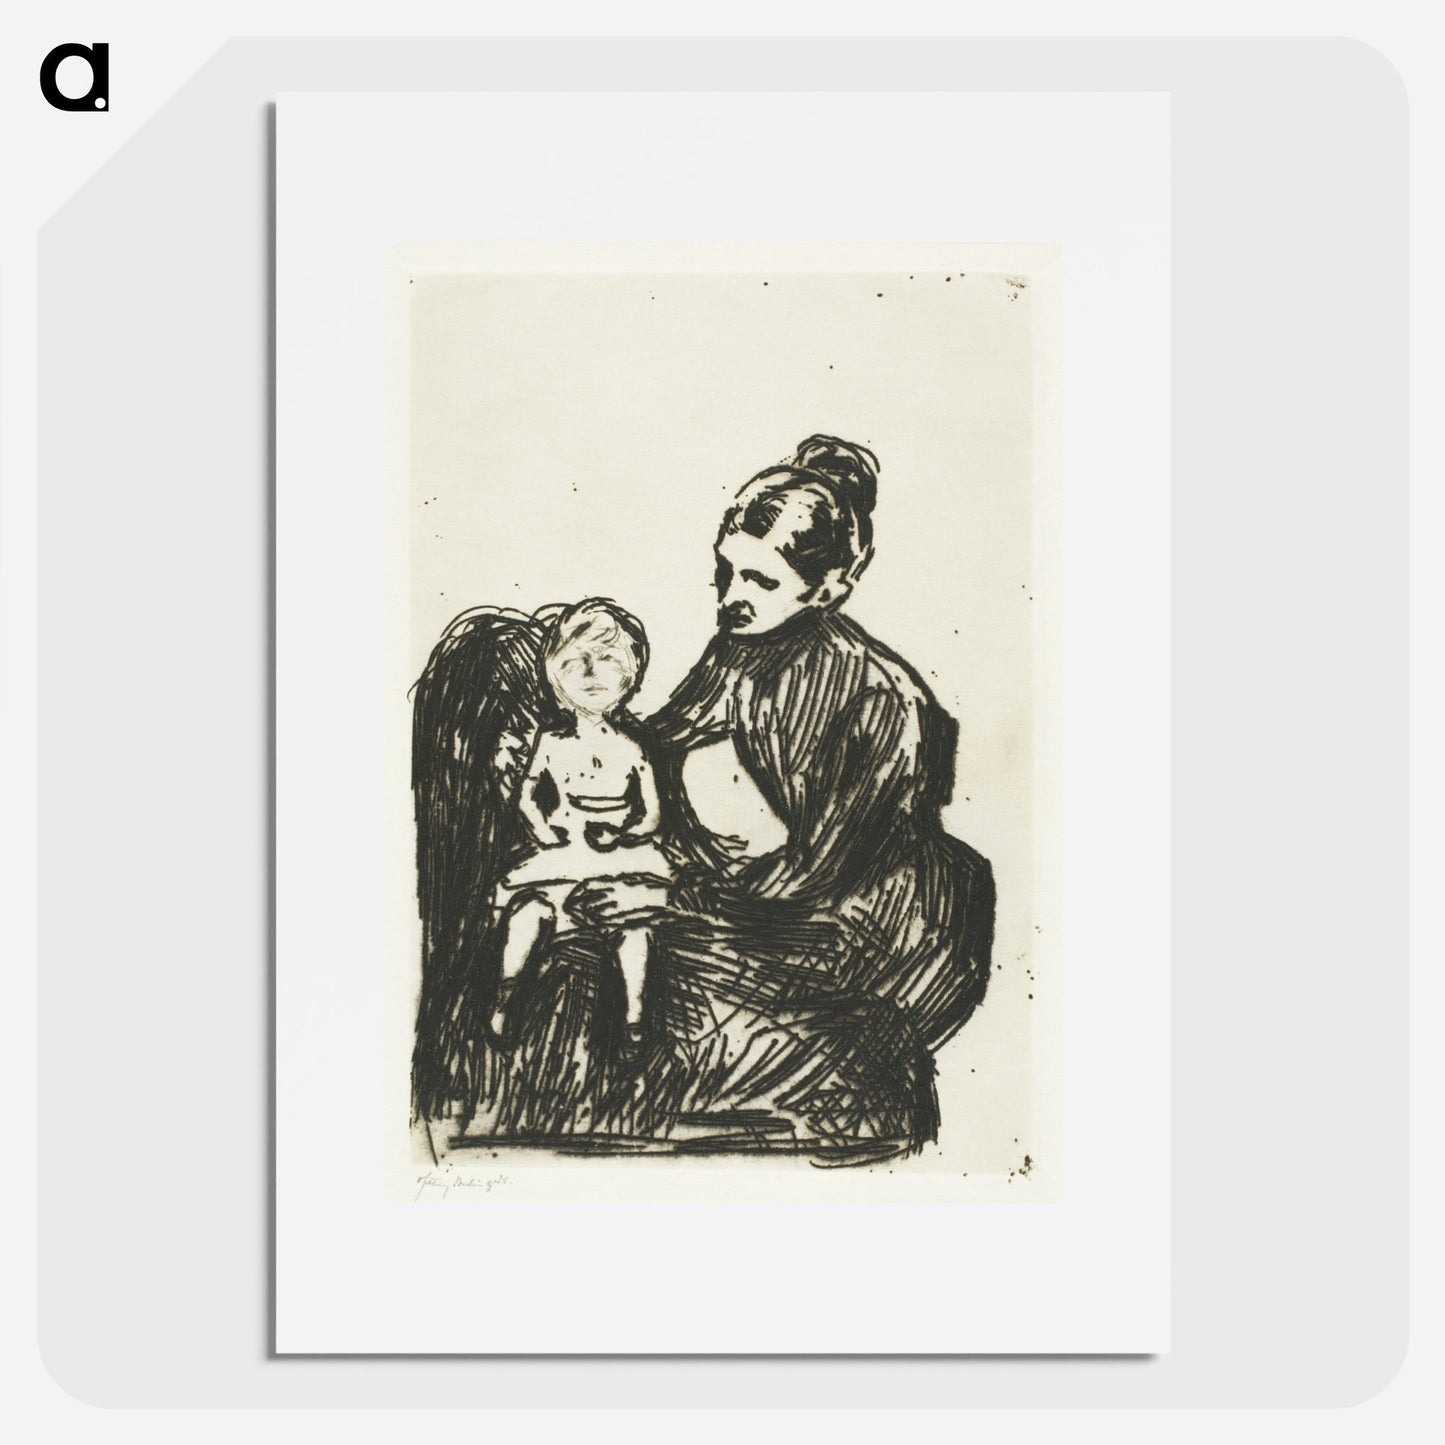 Nurse with a Boy / The Mother and the Crying Child Poster.